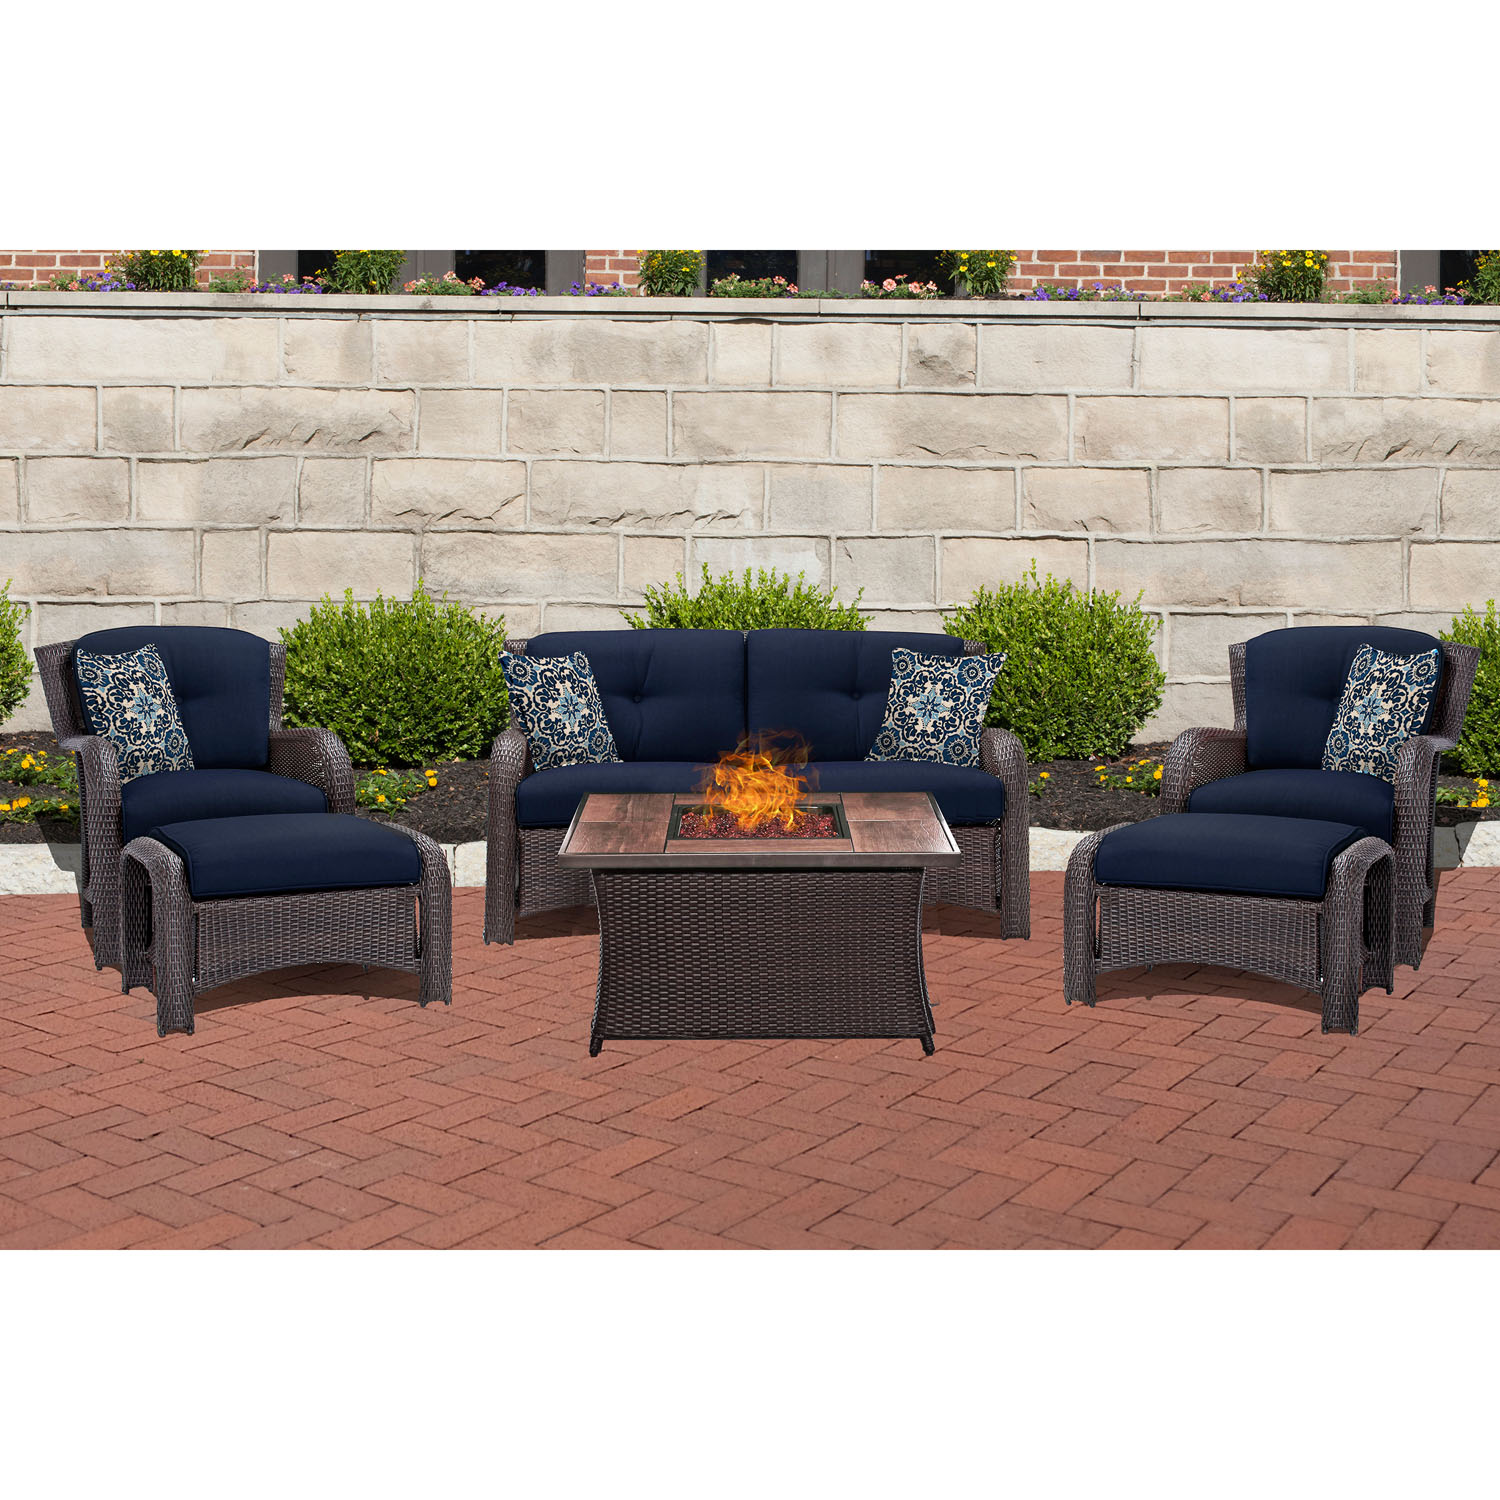 Hanover Strathmere 6-Piece Hand-Woven Wicker Chat Set with Fire Pit Table | Luxury Outdoor Furniture | UV Protected Cushions | Rust and Weather Resistant Frame | Navy | STRATH6PCFP-NVY-WG - image 3 of 12